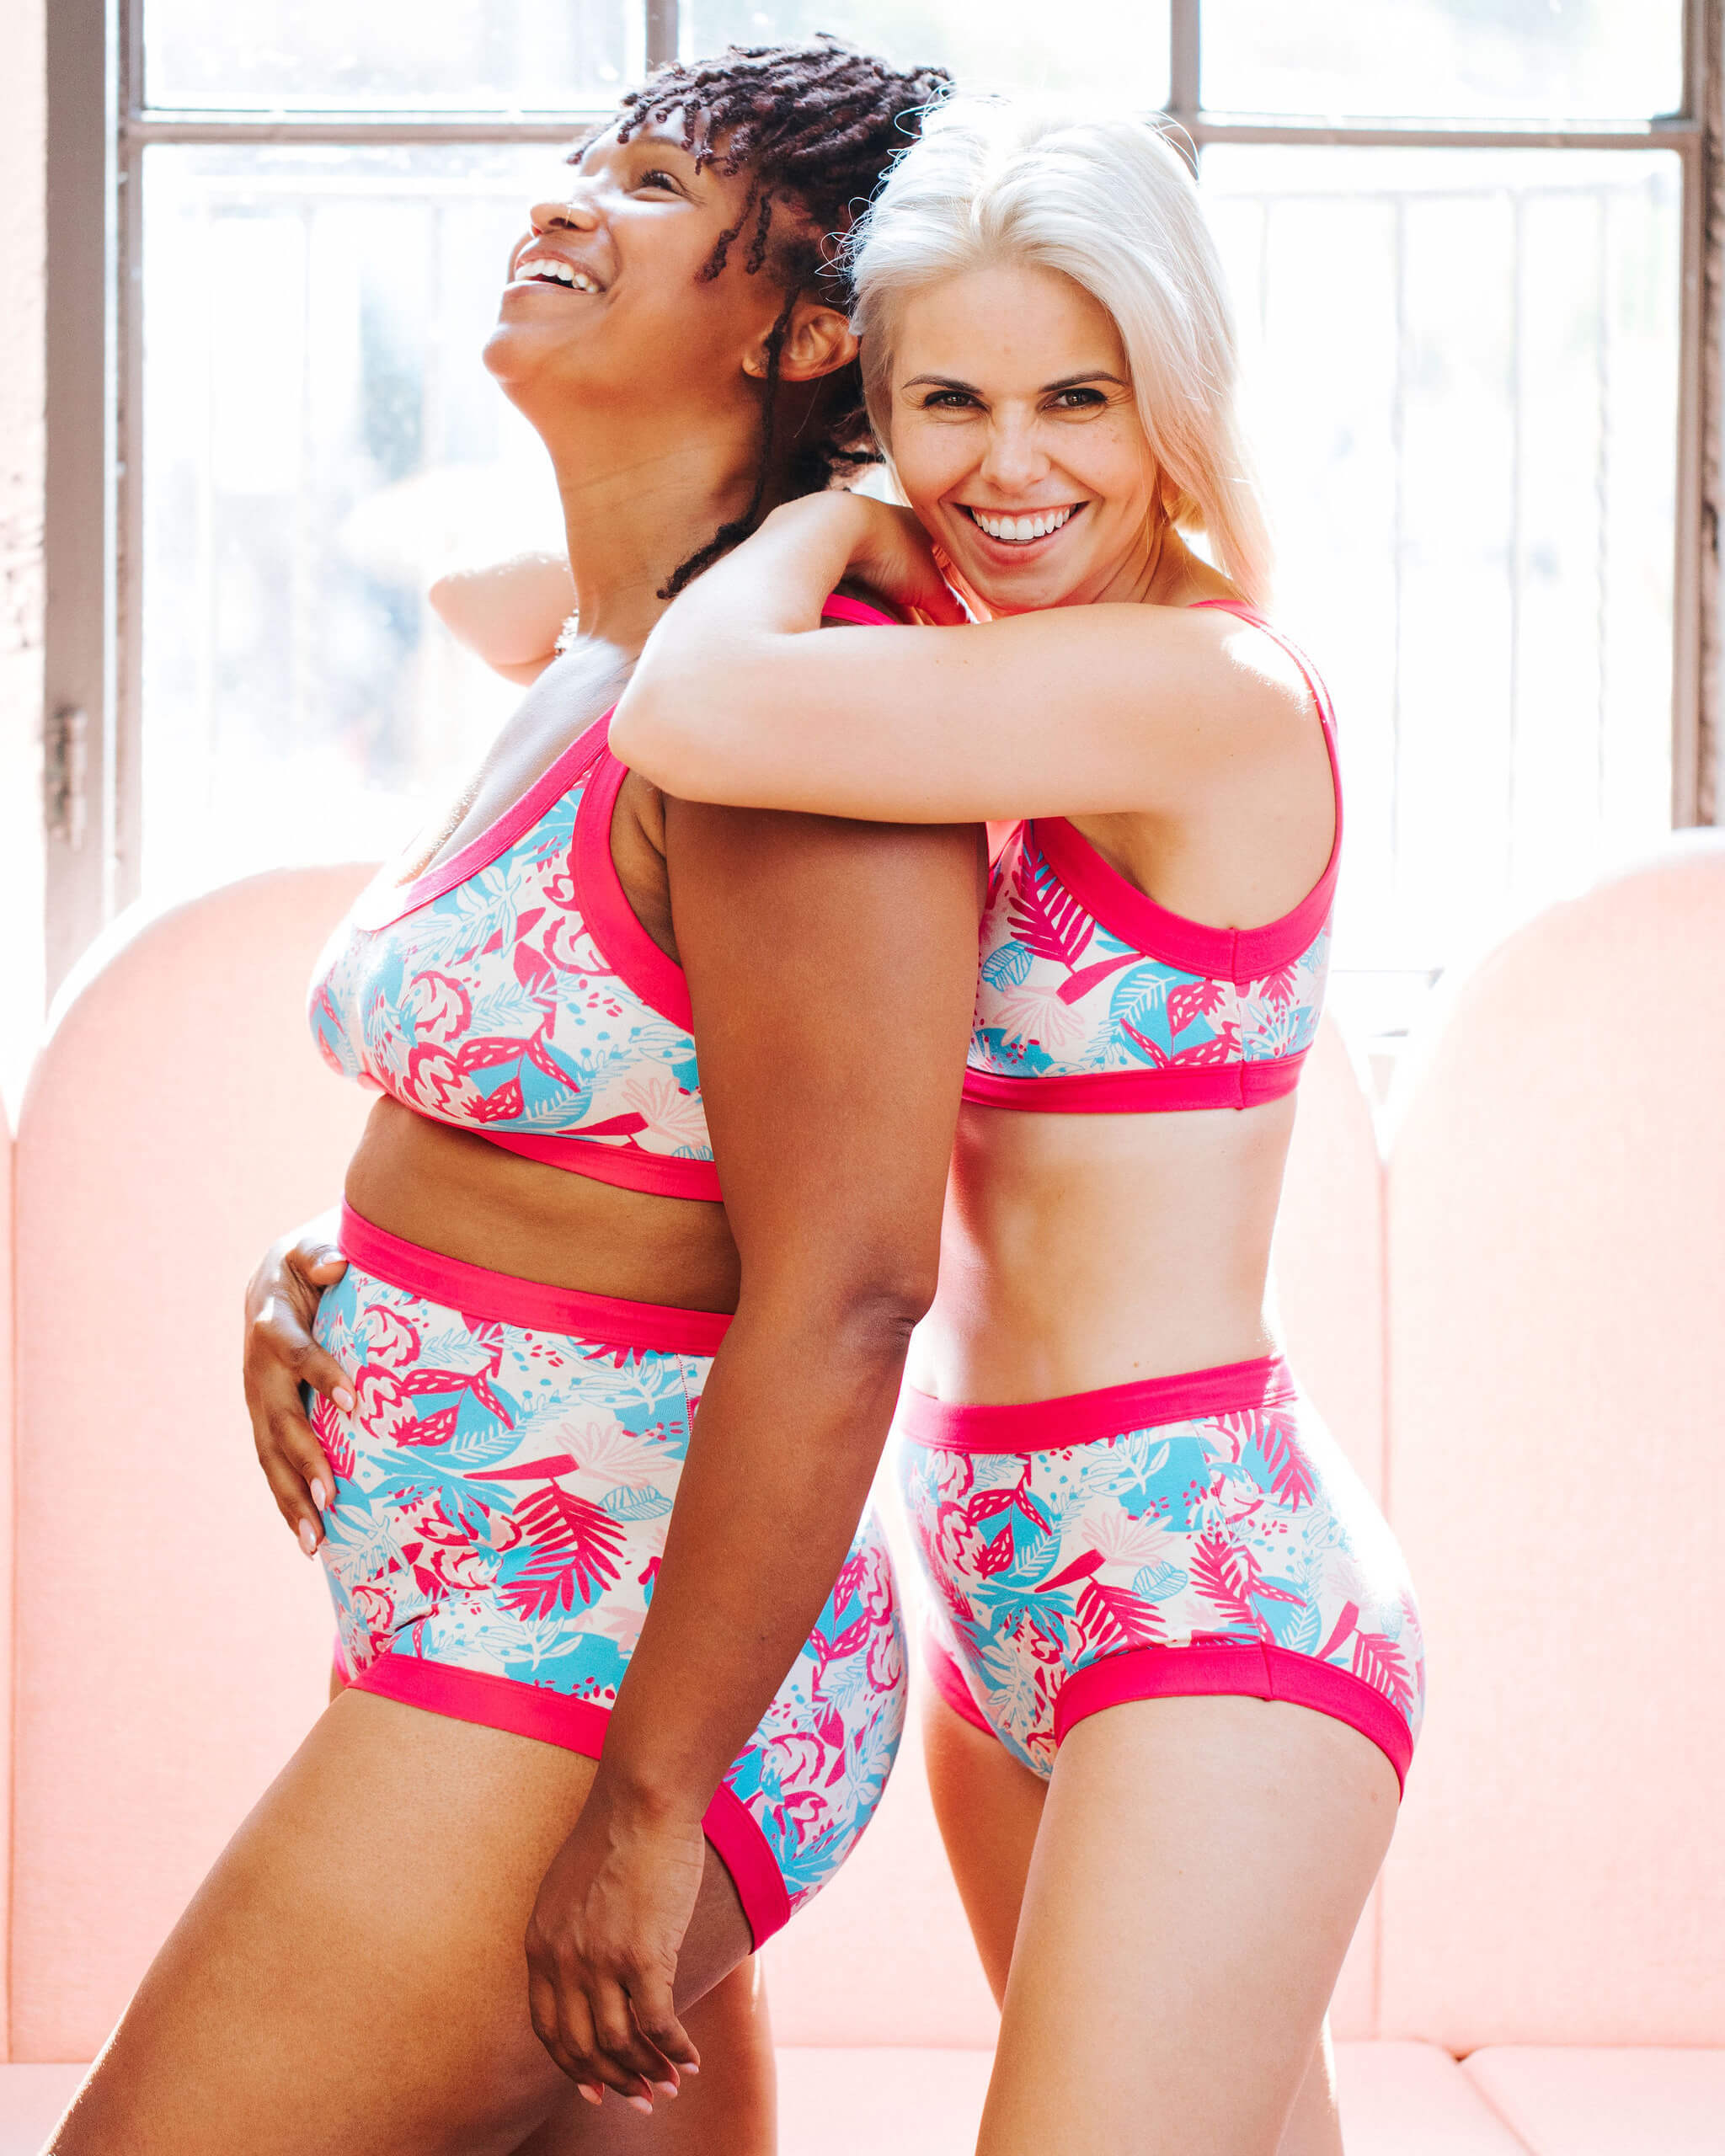 Two models wearing Thunderpants Original and Sky Rise style underwear and Bralettes in Finding Flamingo.